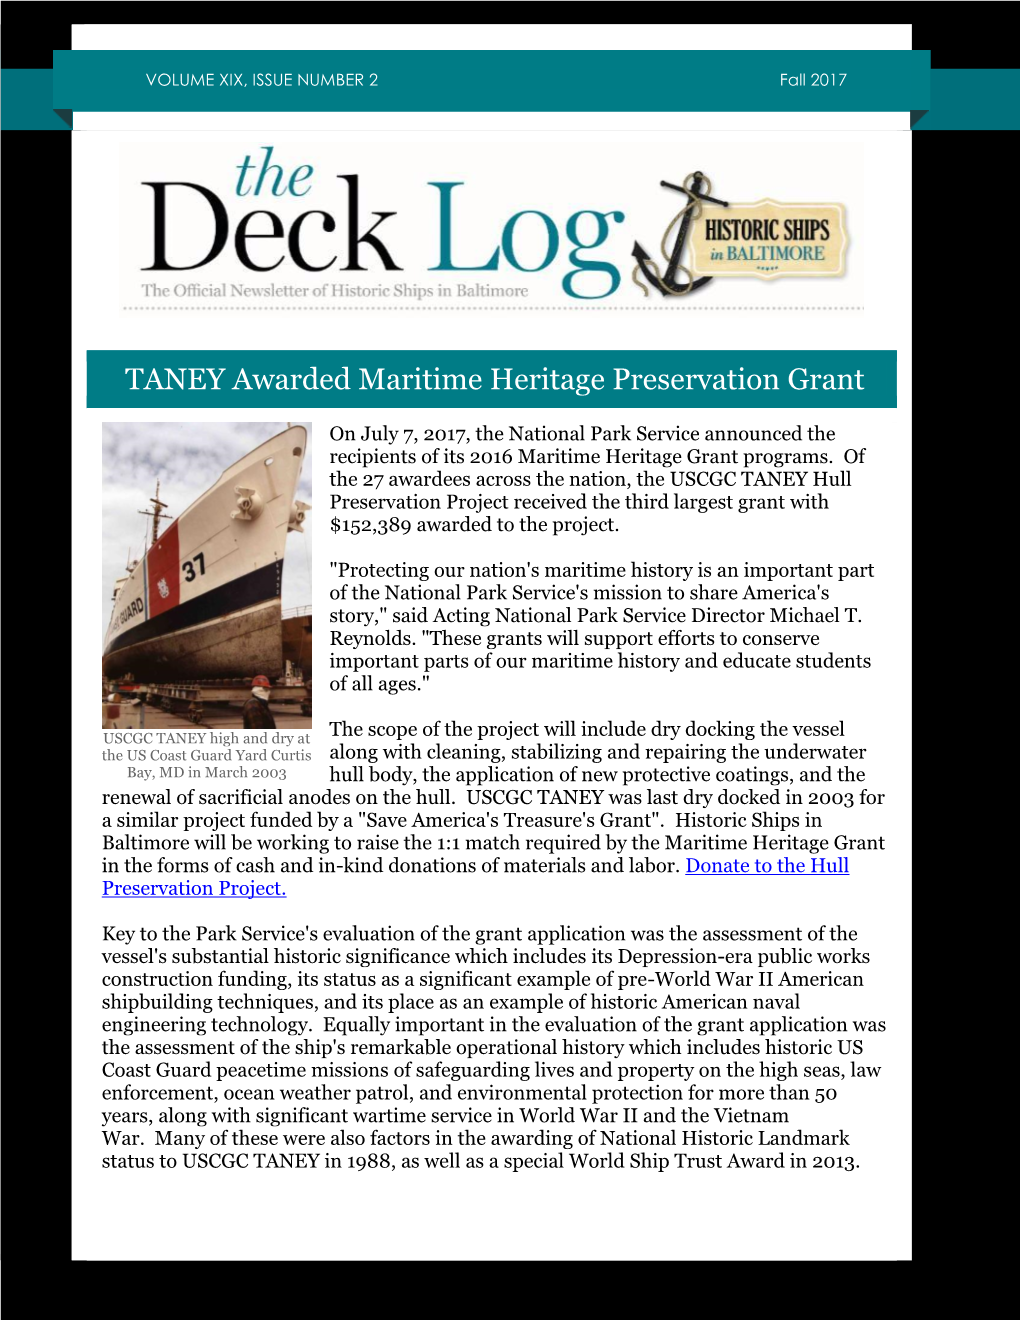 TANEY Awarded Maritime Heritage Preservation Grant